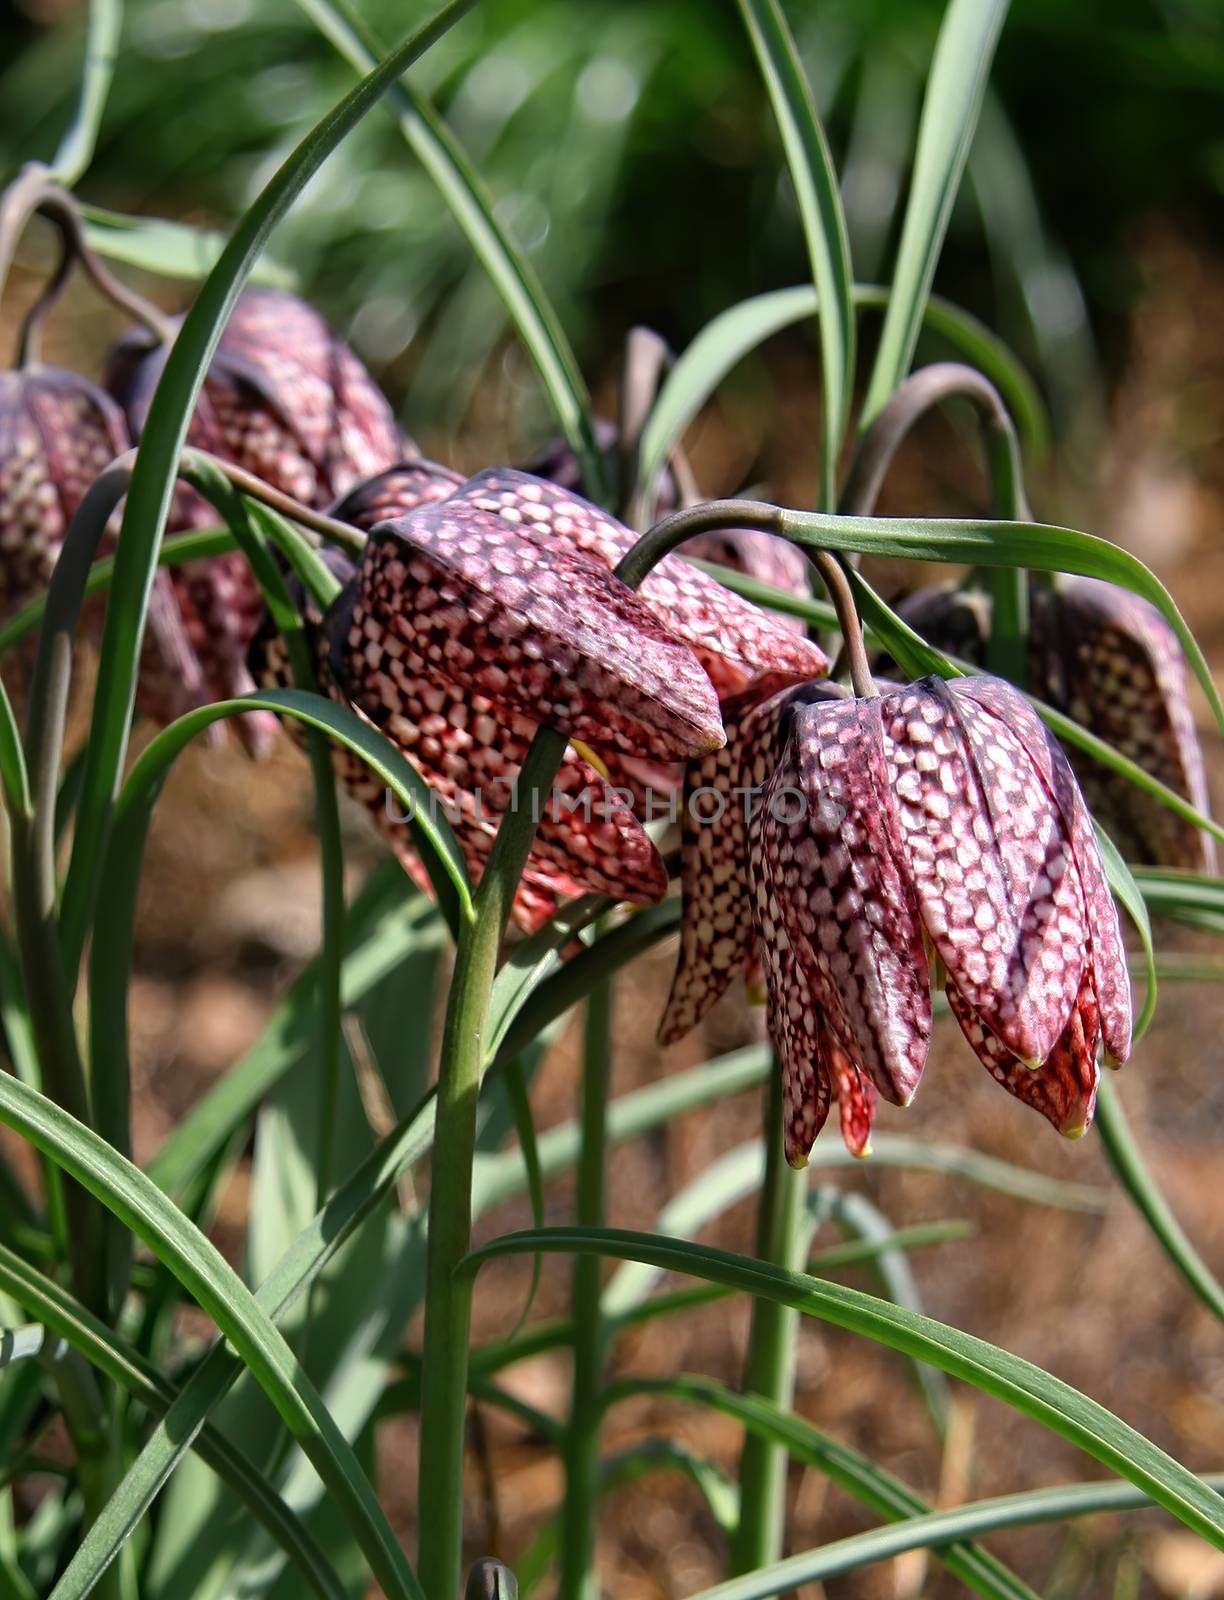 The checkerboard Fritillaria. Group of flowers with a checkerboard raspberry color